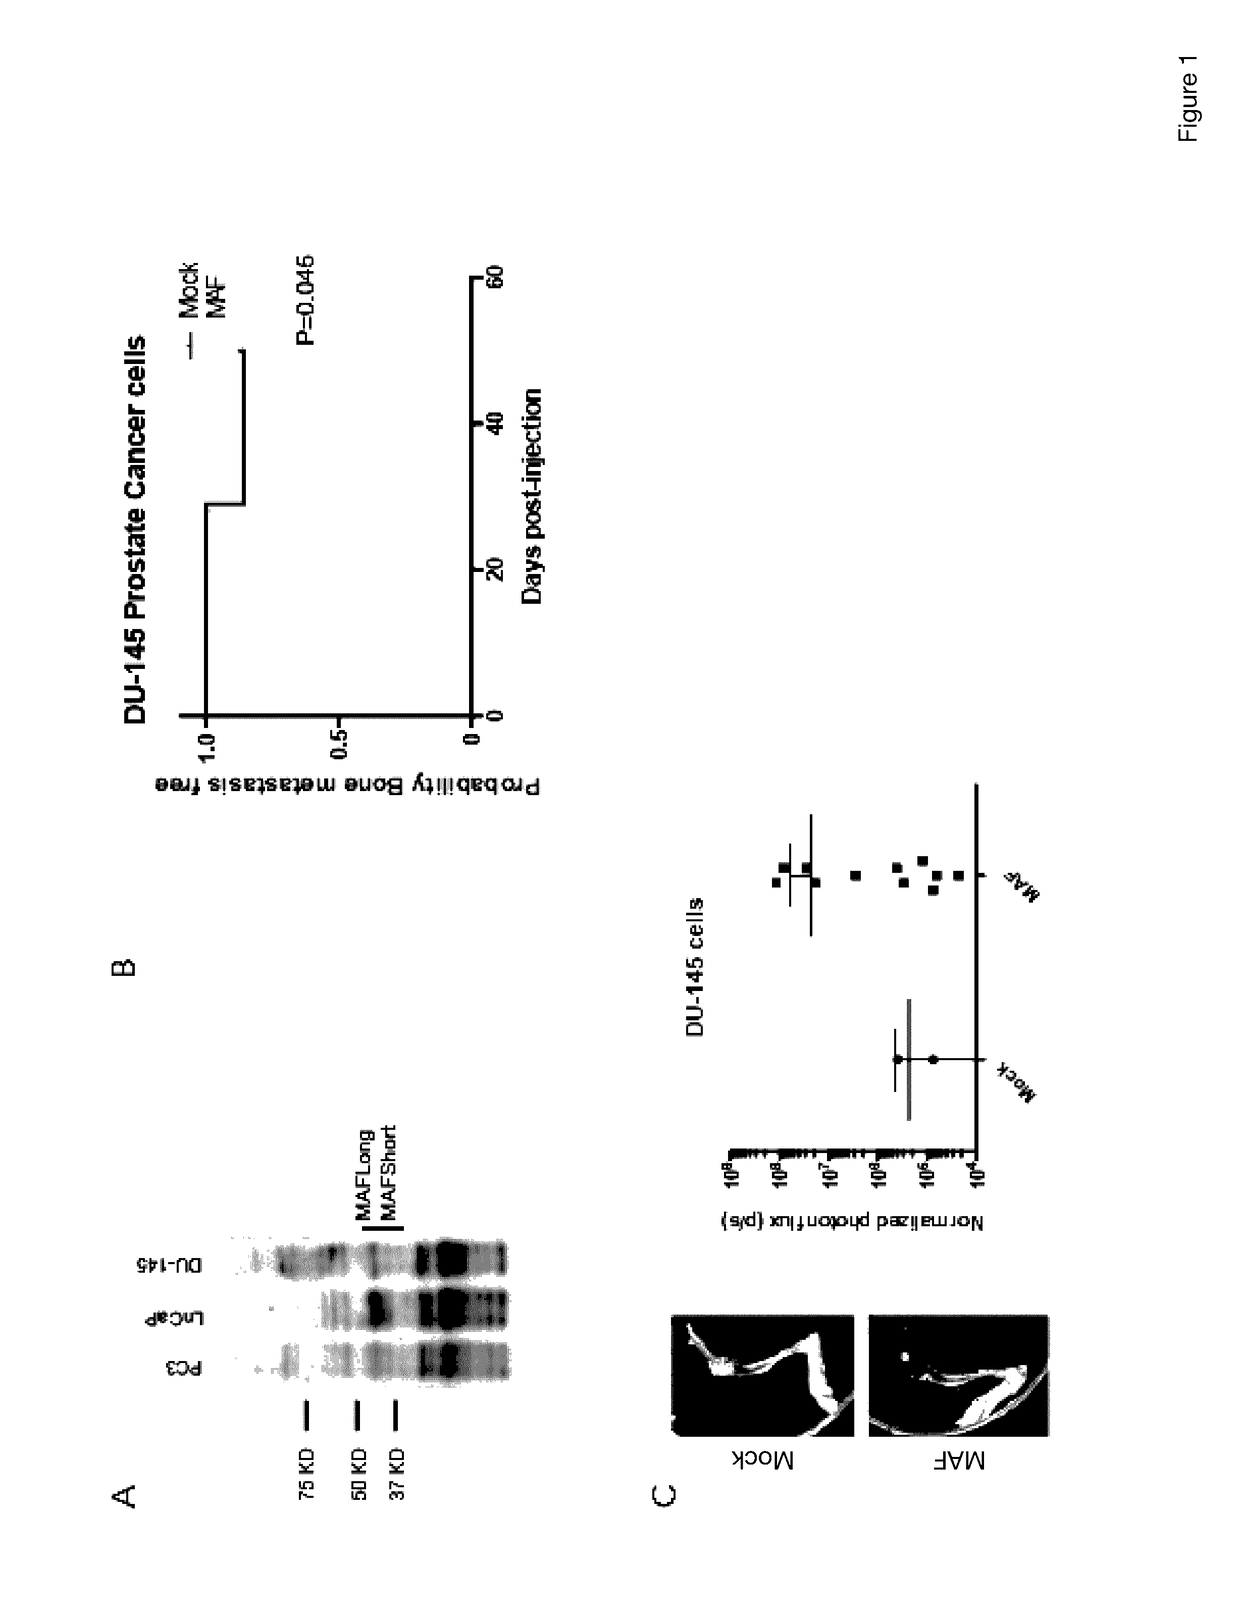 Method for the Diagnosis, Prognosis and Treatment of Prostate Cancer Metastasis